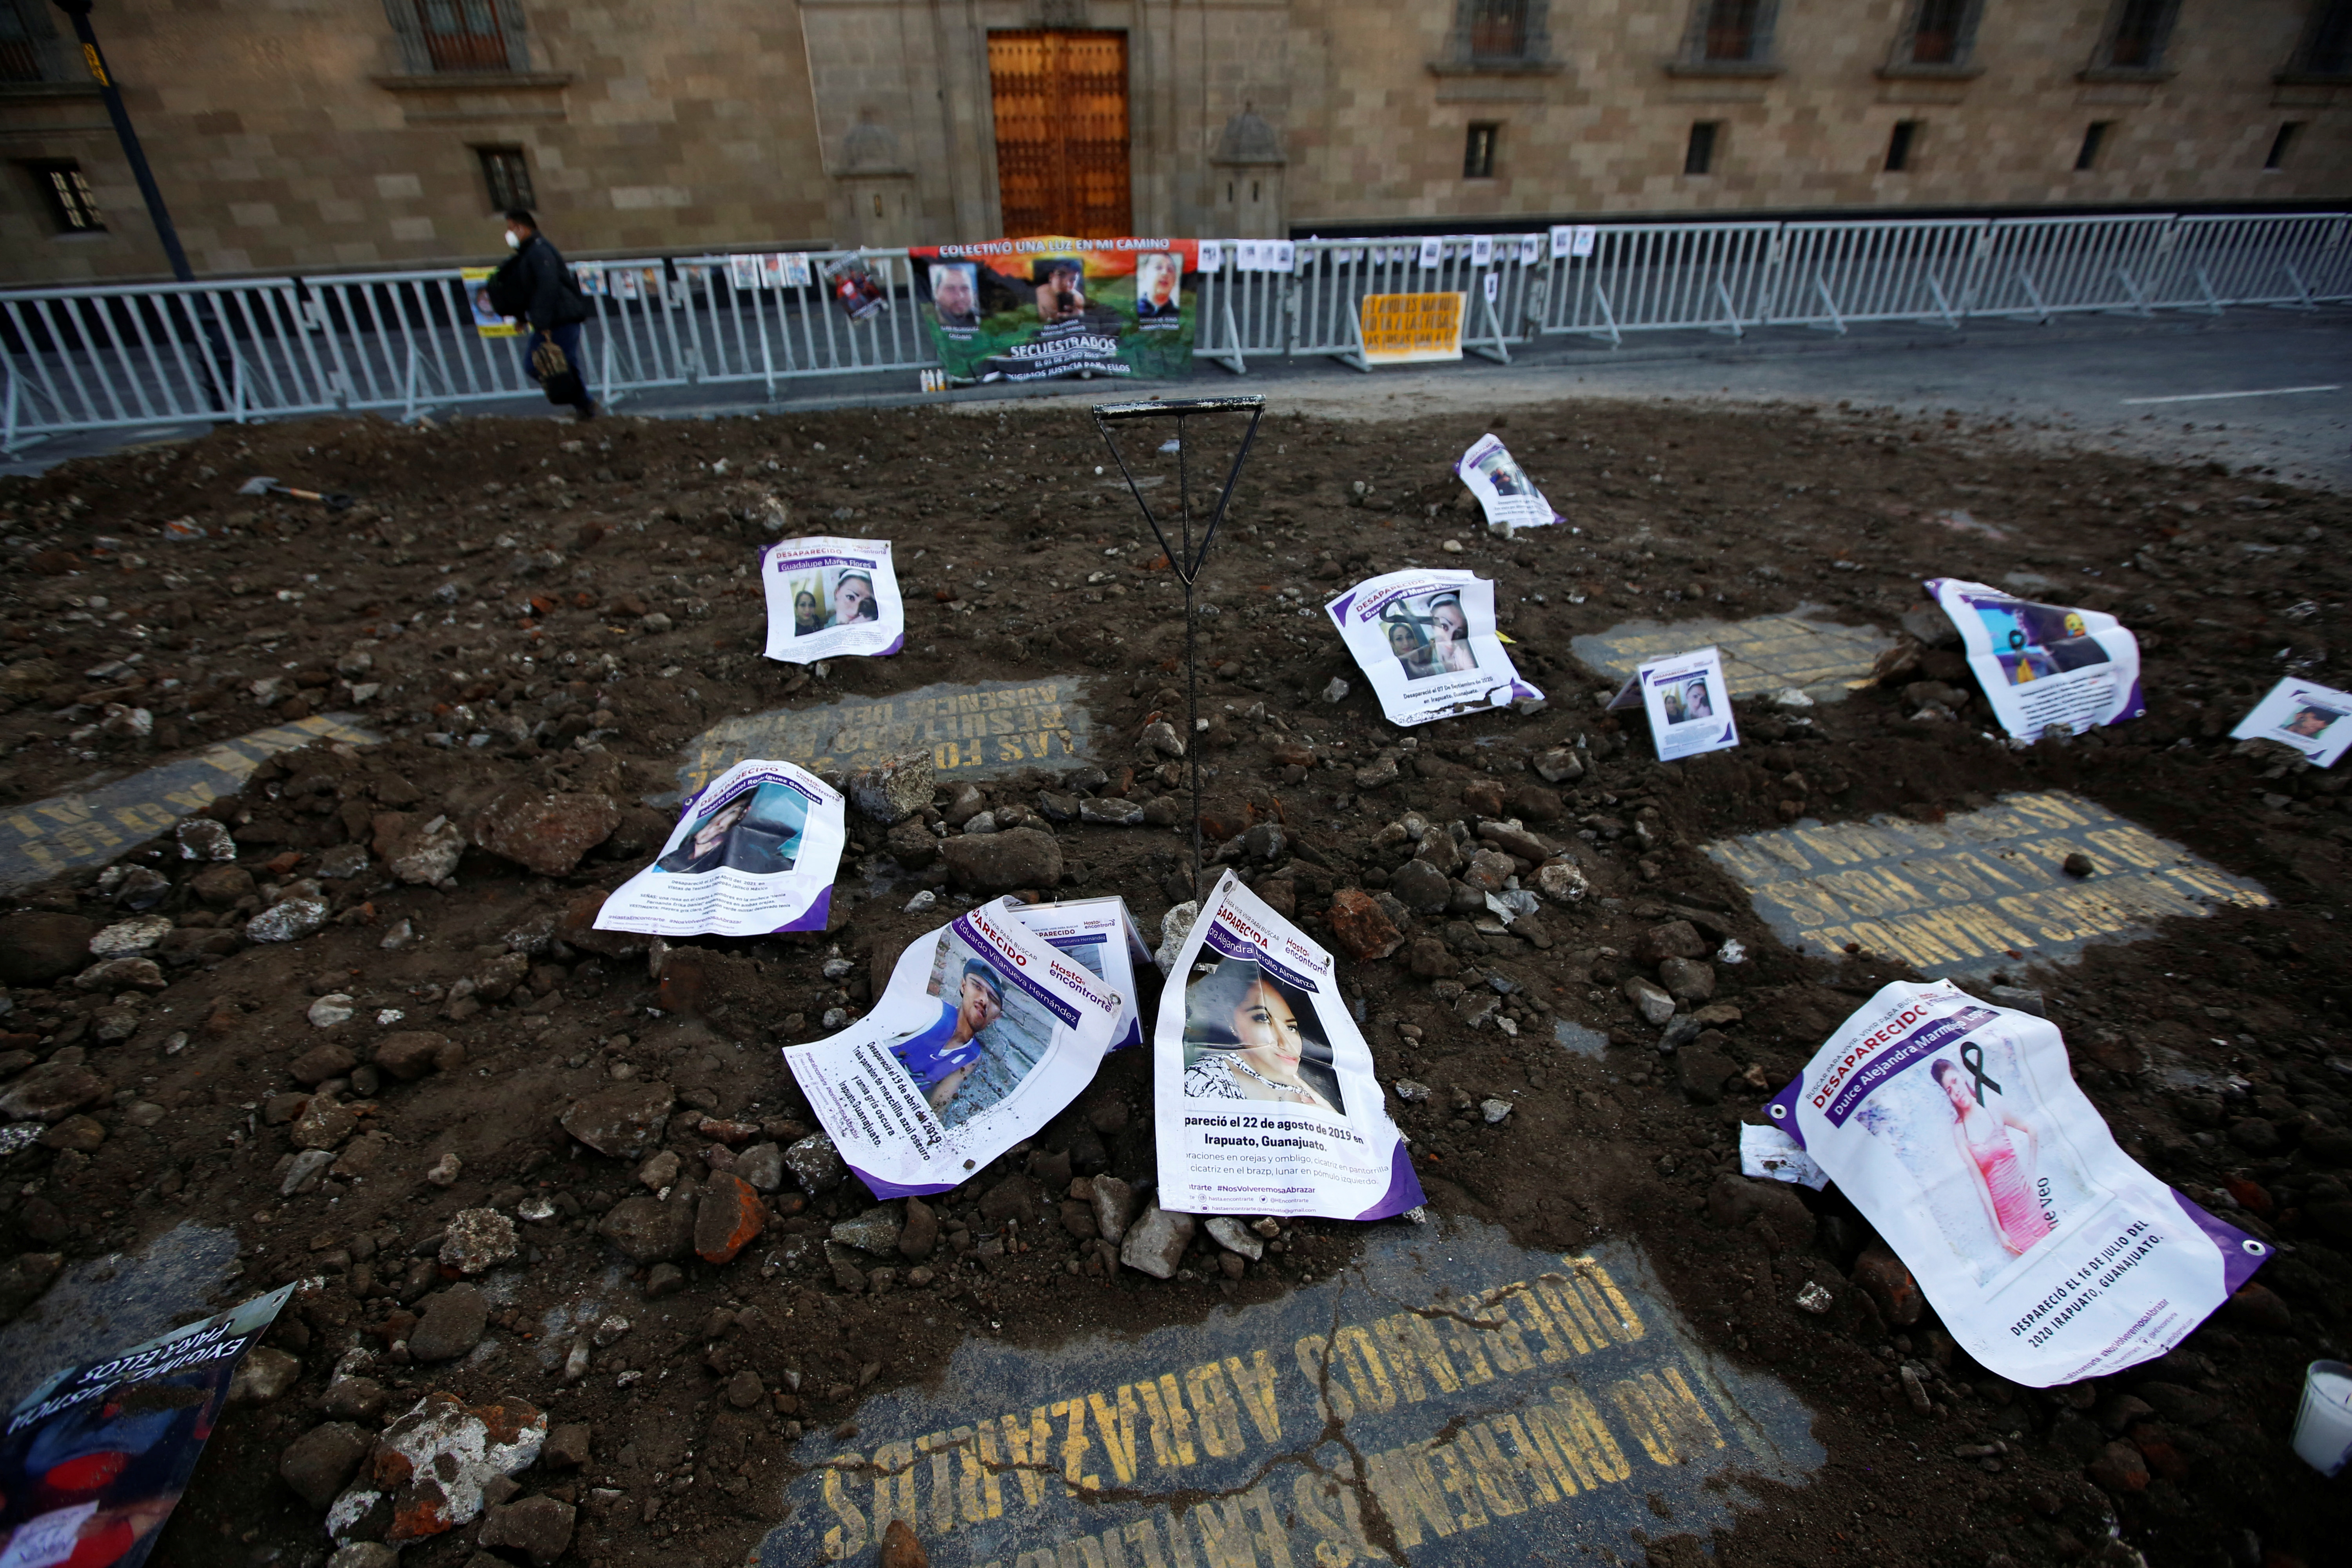 Flyers and posters with information on missing persons in the state of Guanajuato are placed on simulated clandestine graves arranged by their relatives during a protest outside the National Palace in Mexico City, Mexico December 13, 2021. REUTERS/Gustavo Graf